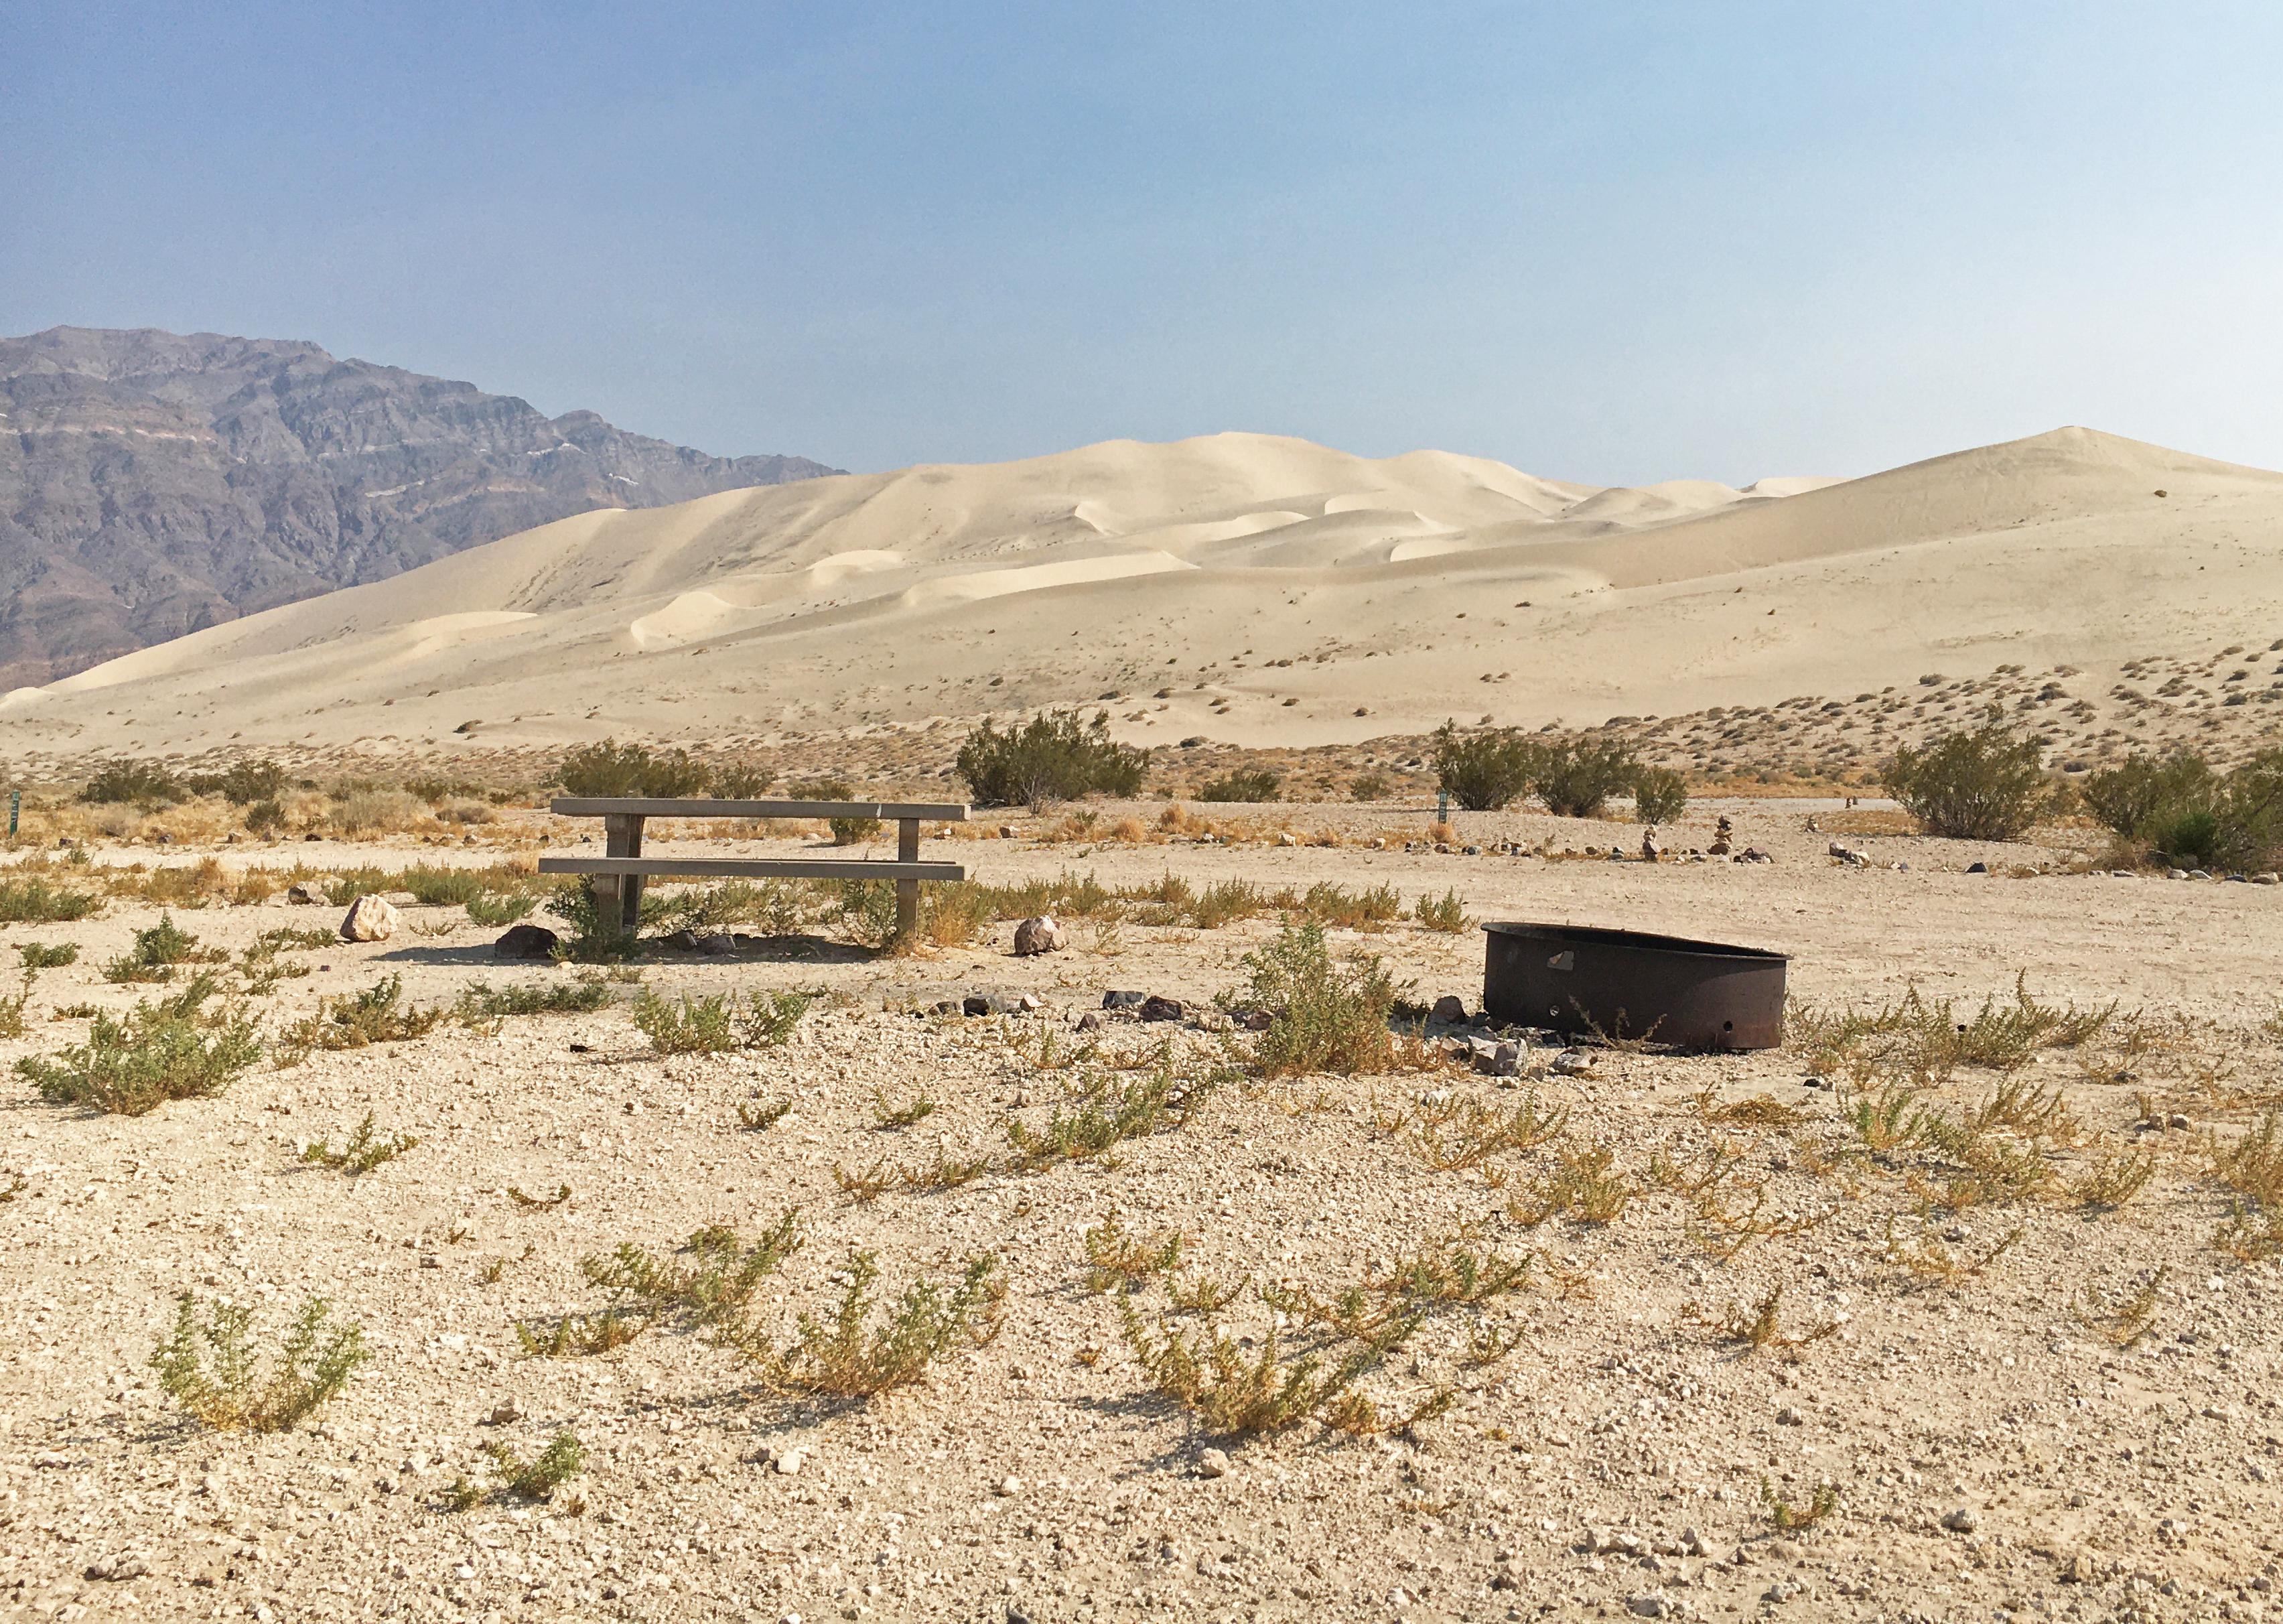 Desert campsite with picnic table, metal fire ring, view of tall sand dunes in the background